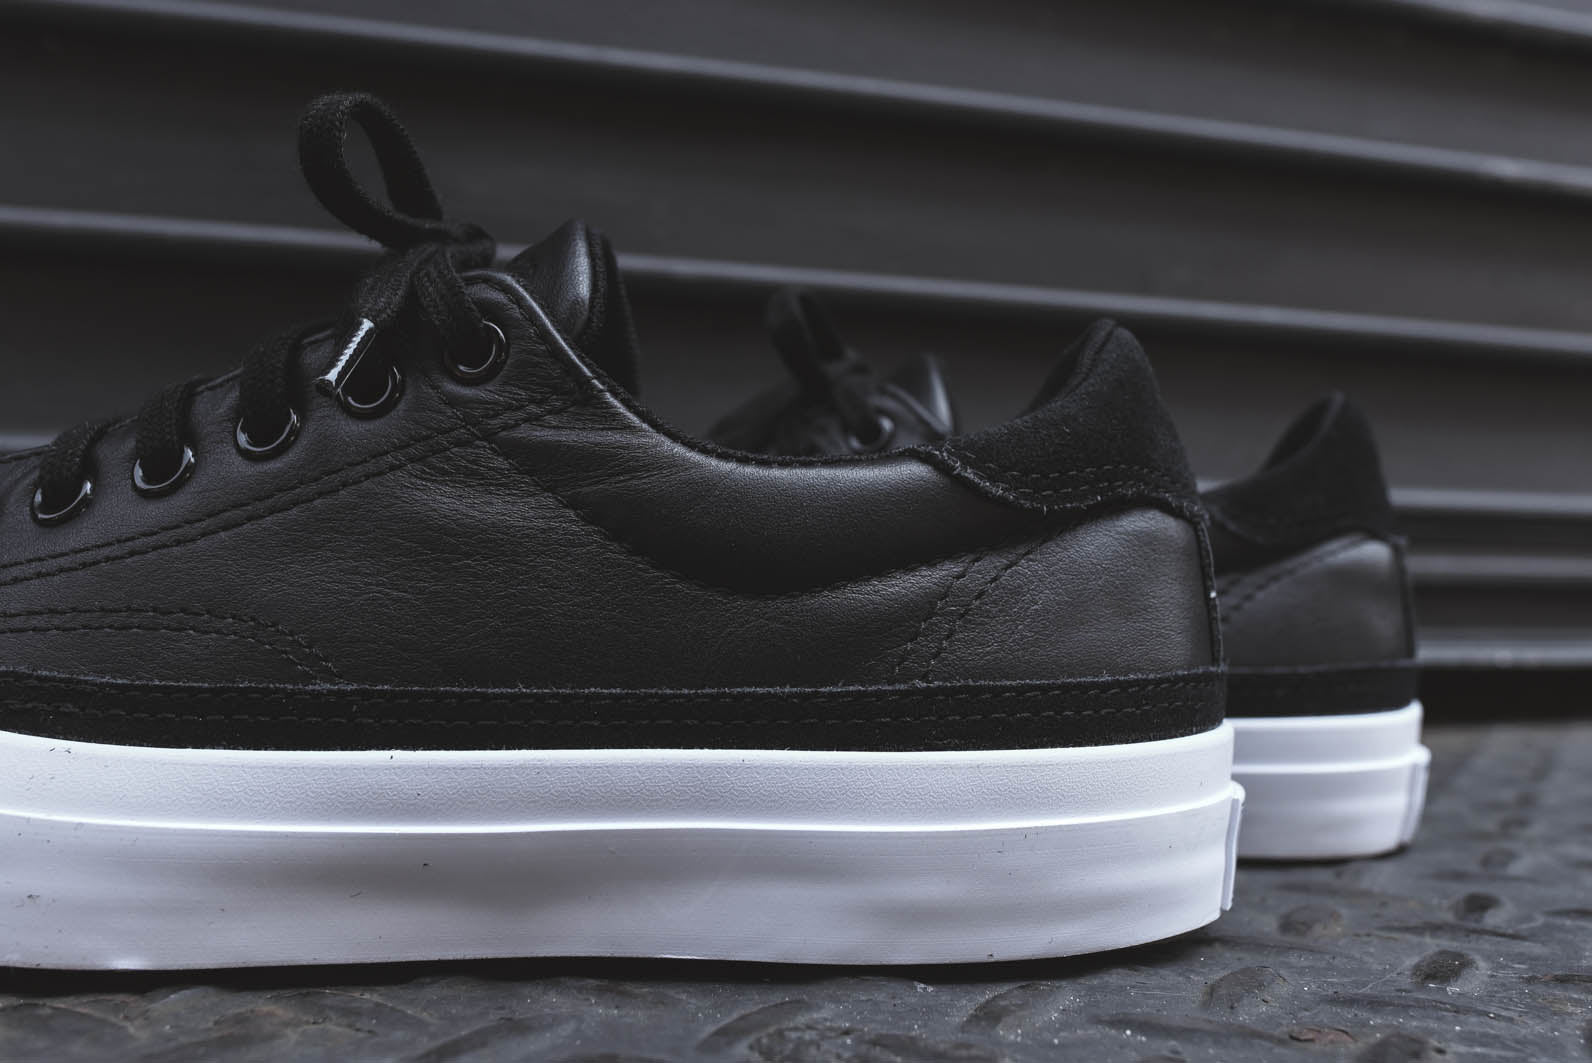 Converse Jack Purcell II - Nappa Pack 